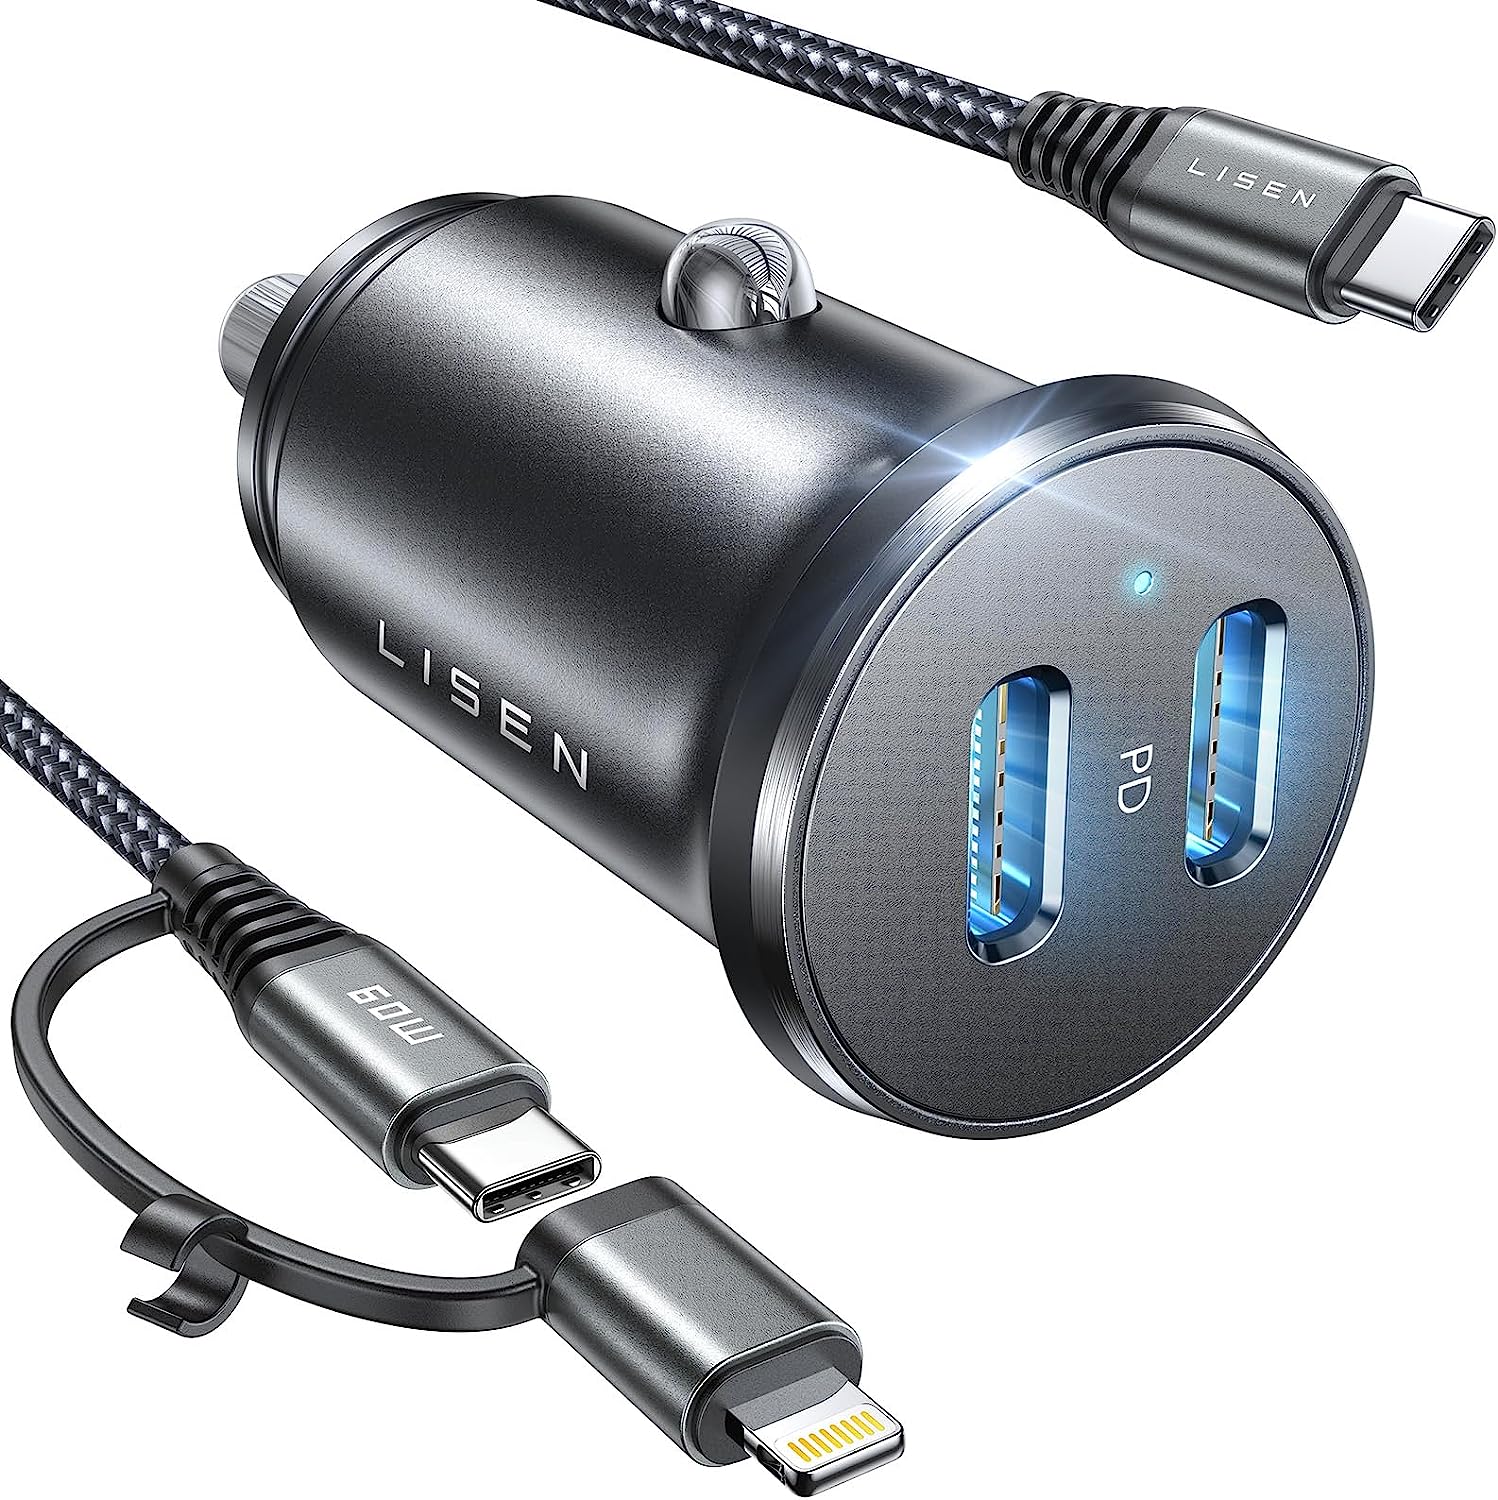 Car Charger with USB-C and USB-A